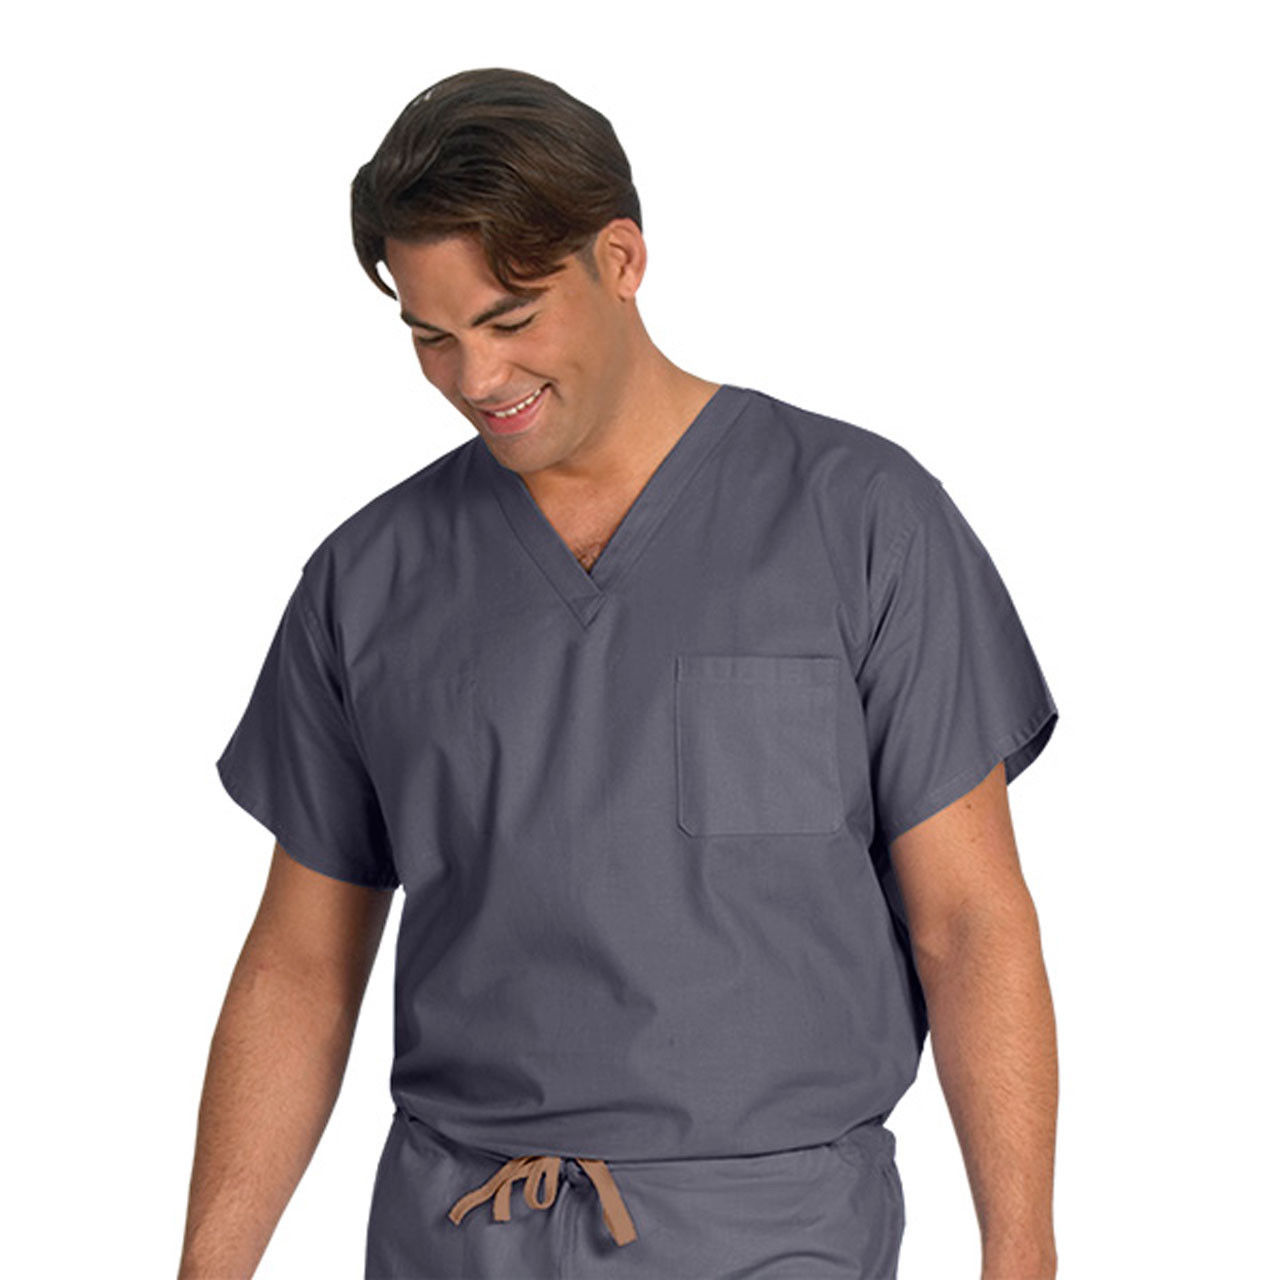 Are these scrub tops and bottoms suitable for all facilities?